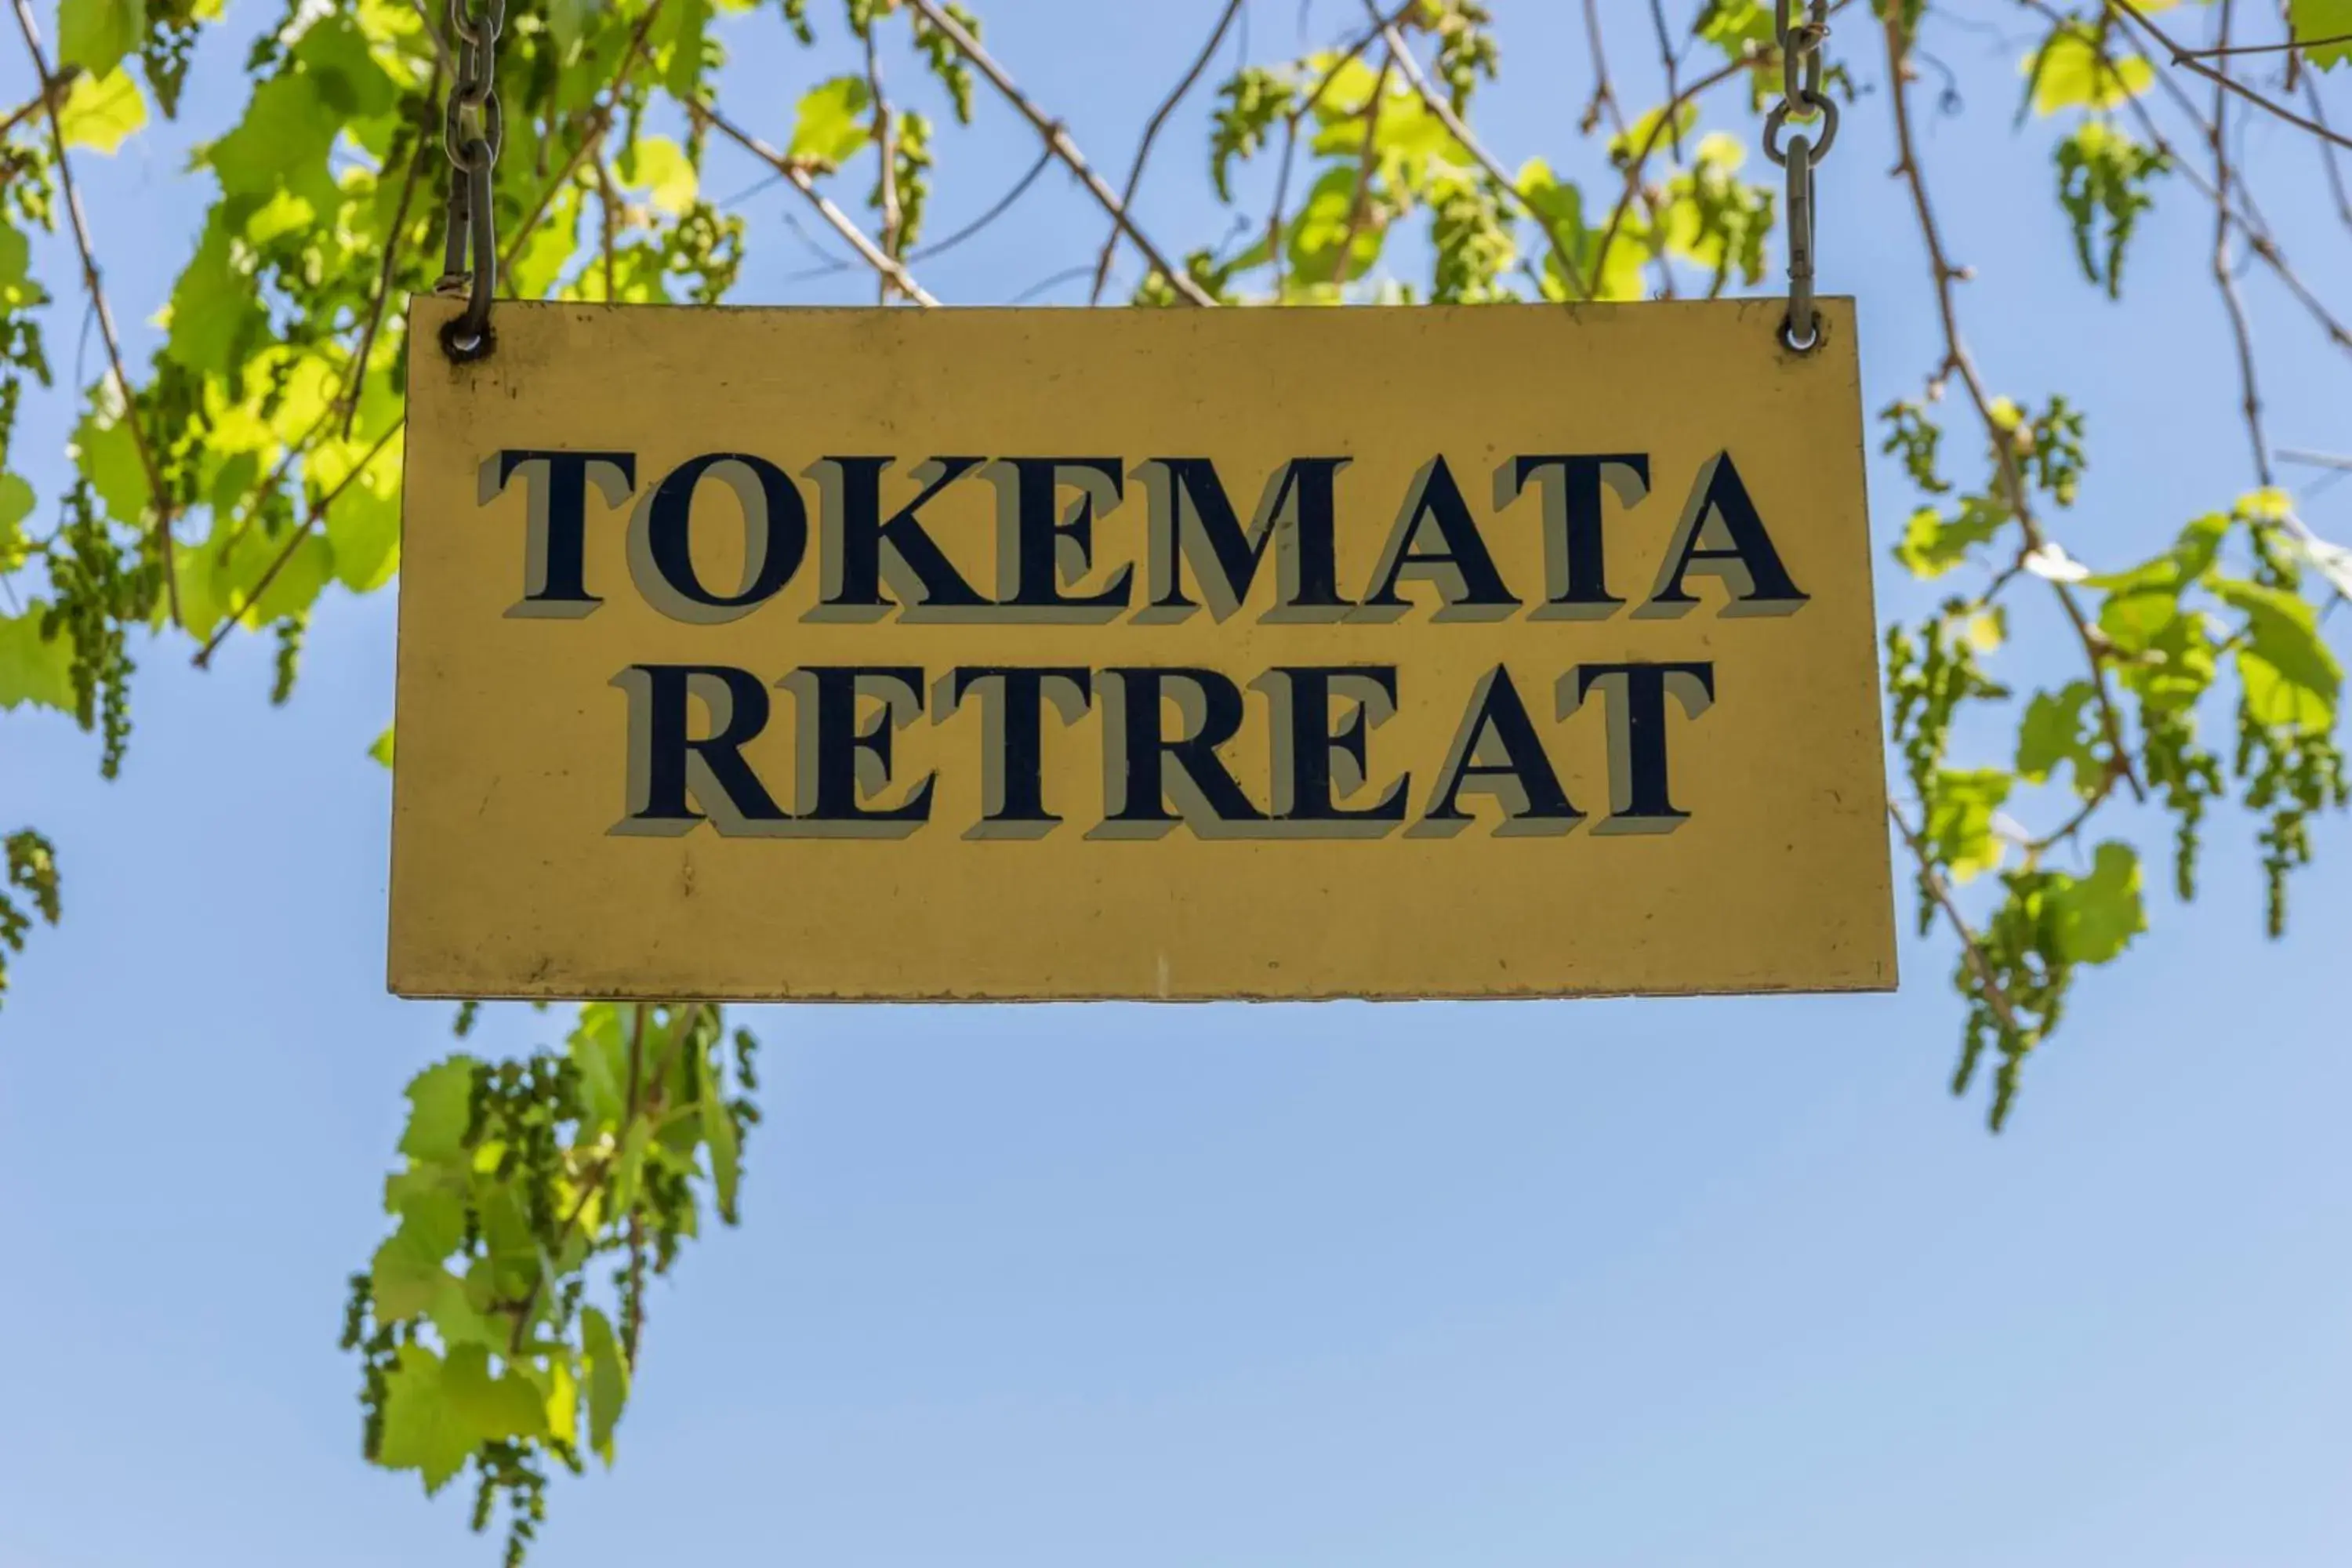 Property logo or sign in Tokemata Retreat